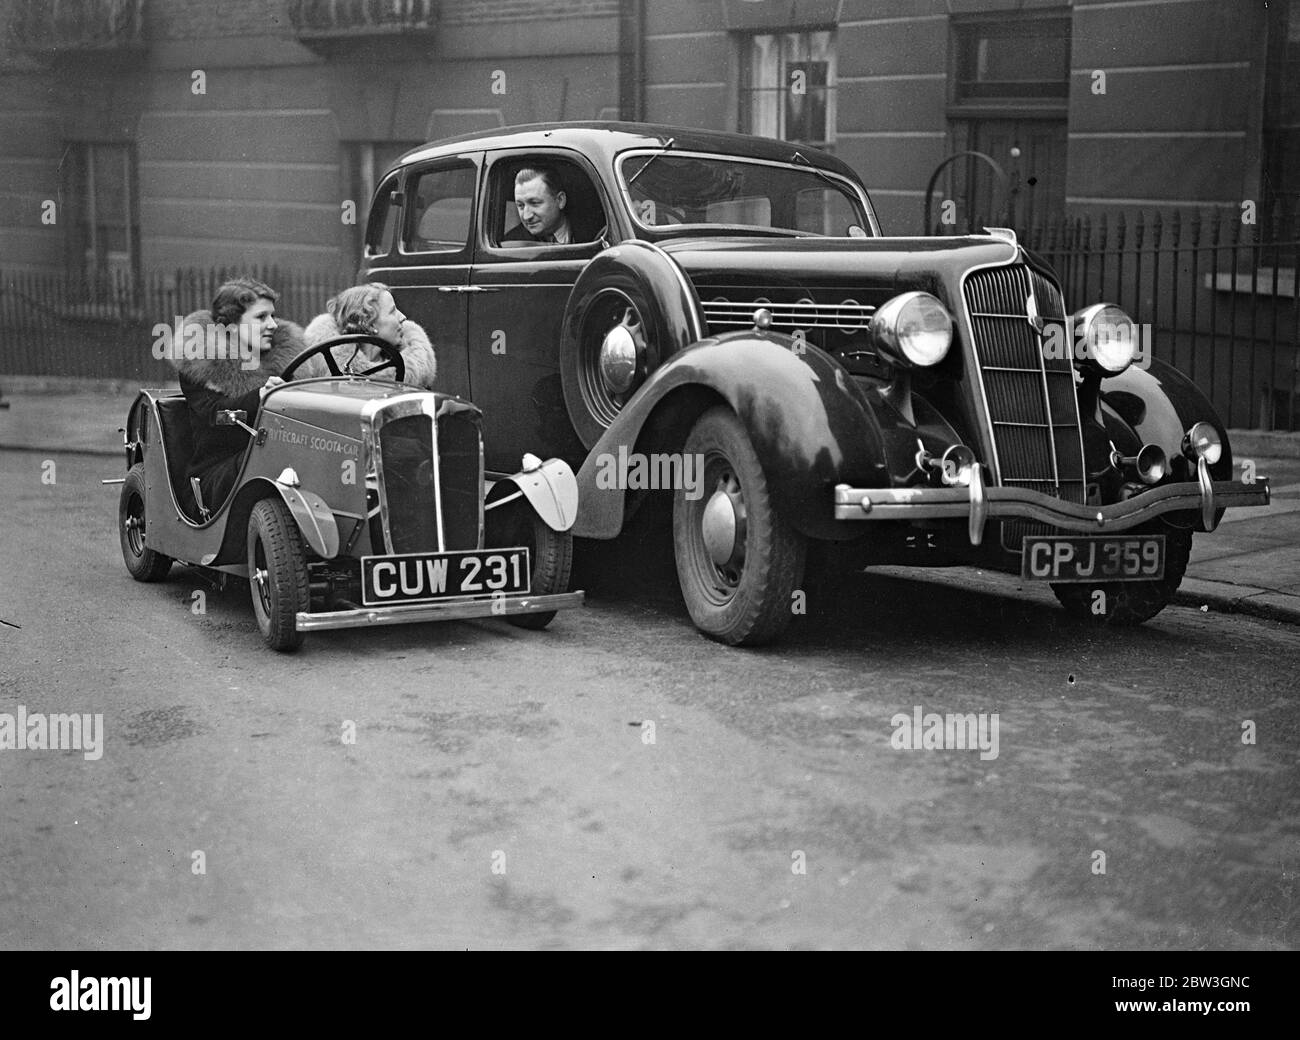 Cheapest British car demonstrated in London . To and a half horse power engine travels 80 miles on gallon of petrol . The new scouts car . 2 April 1935 Stock Photo